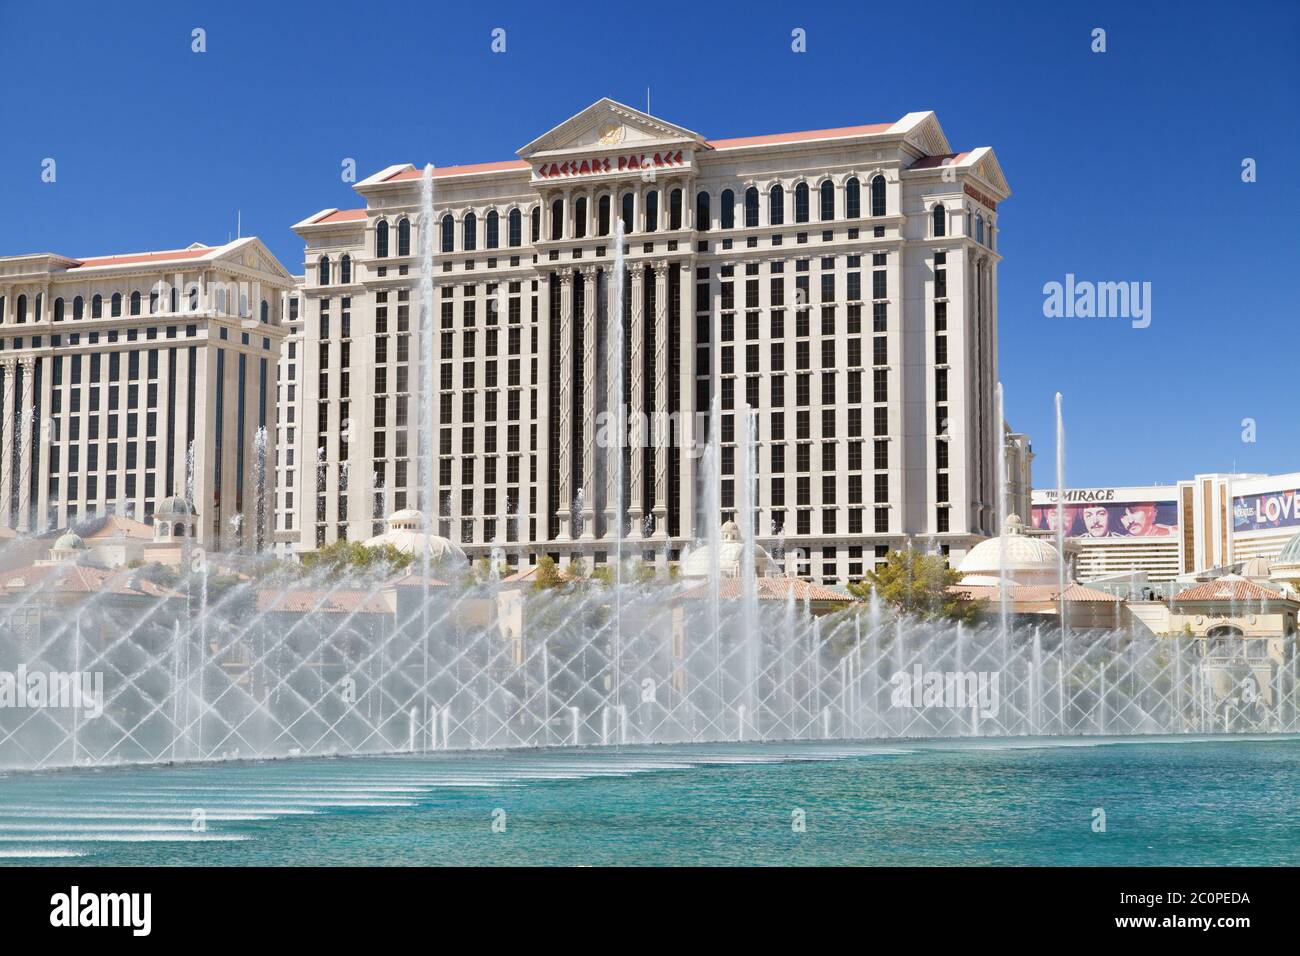 Las Vegas, Nevada - August 30, 2019: Caesars Palace and the Fountains of Bellagio in Las Vegas, Nevada, United States. Stock Photo